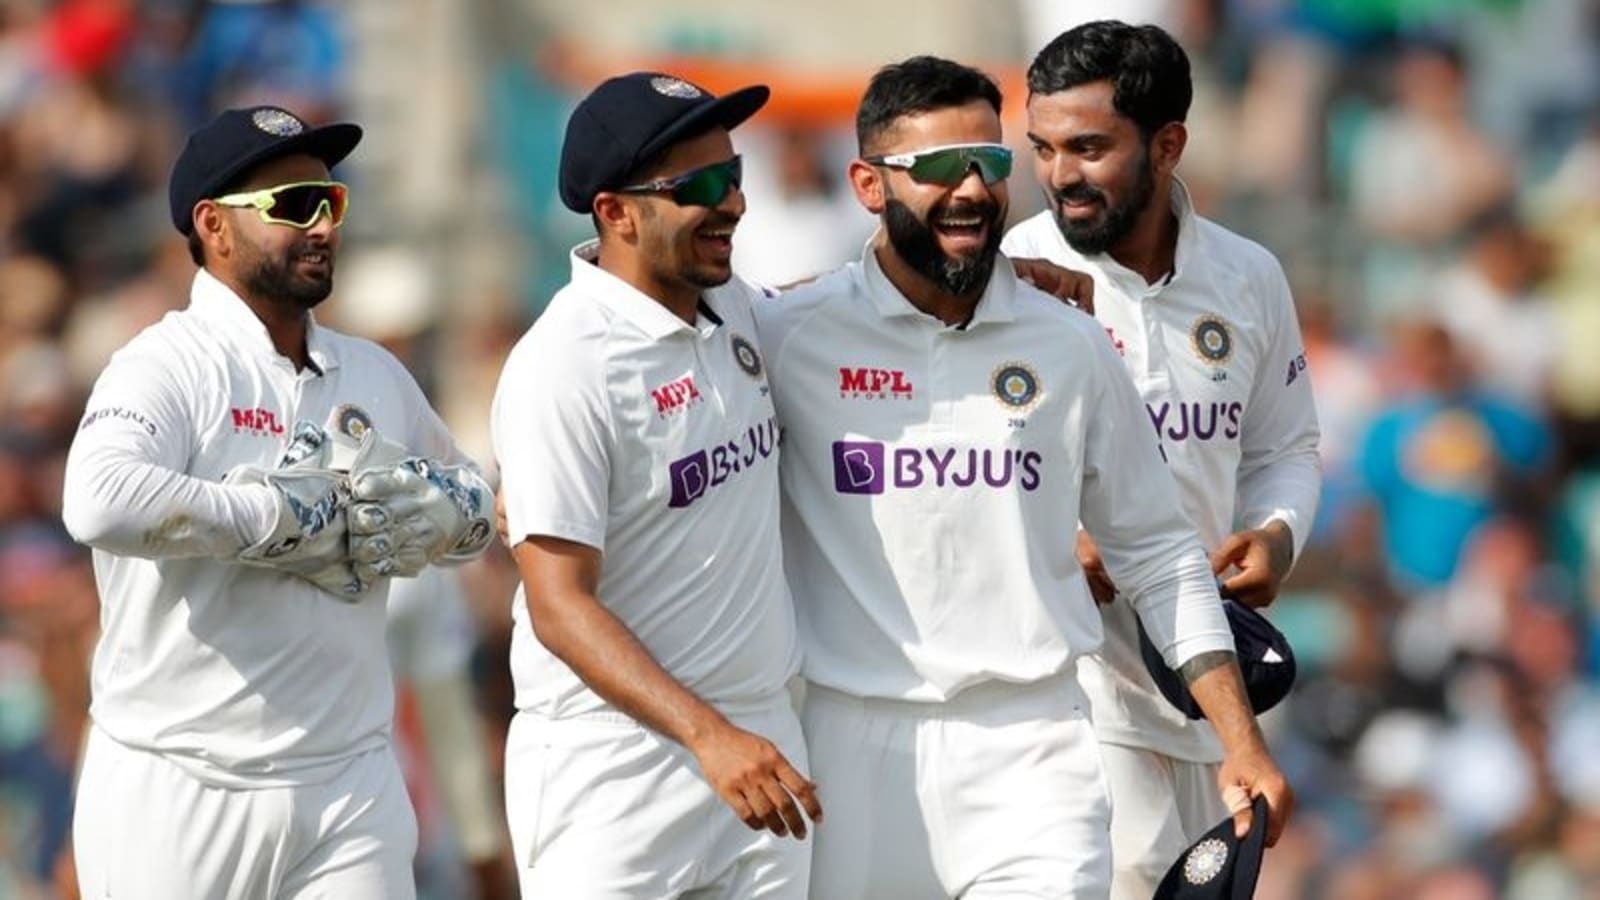 India vs England 5th Test Live Streaming When and where to watch IND vs ENG 5th Test Live on TV and Online Cricket